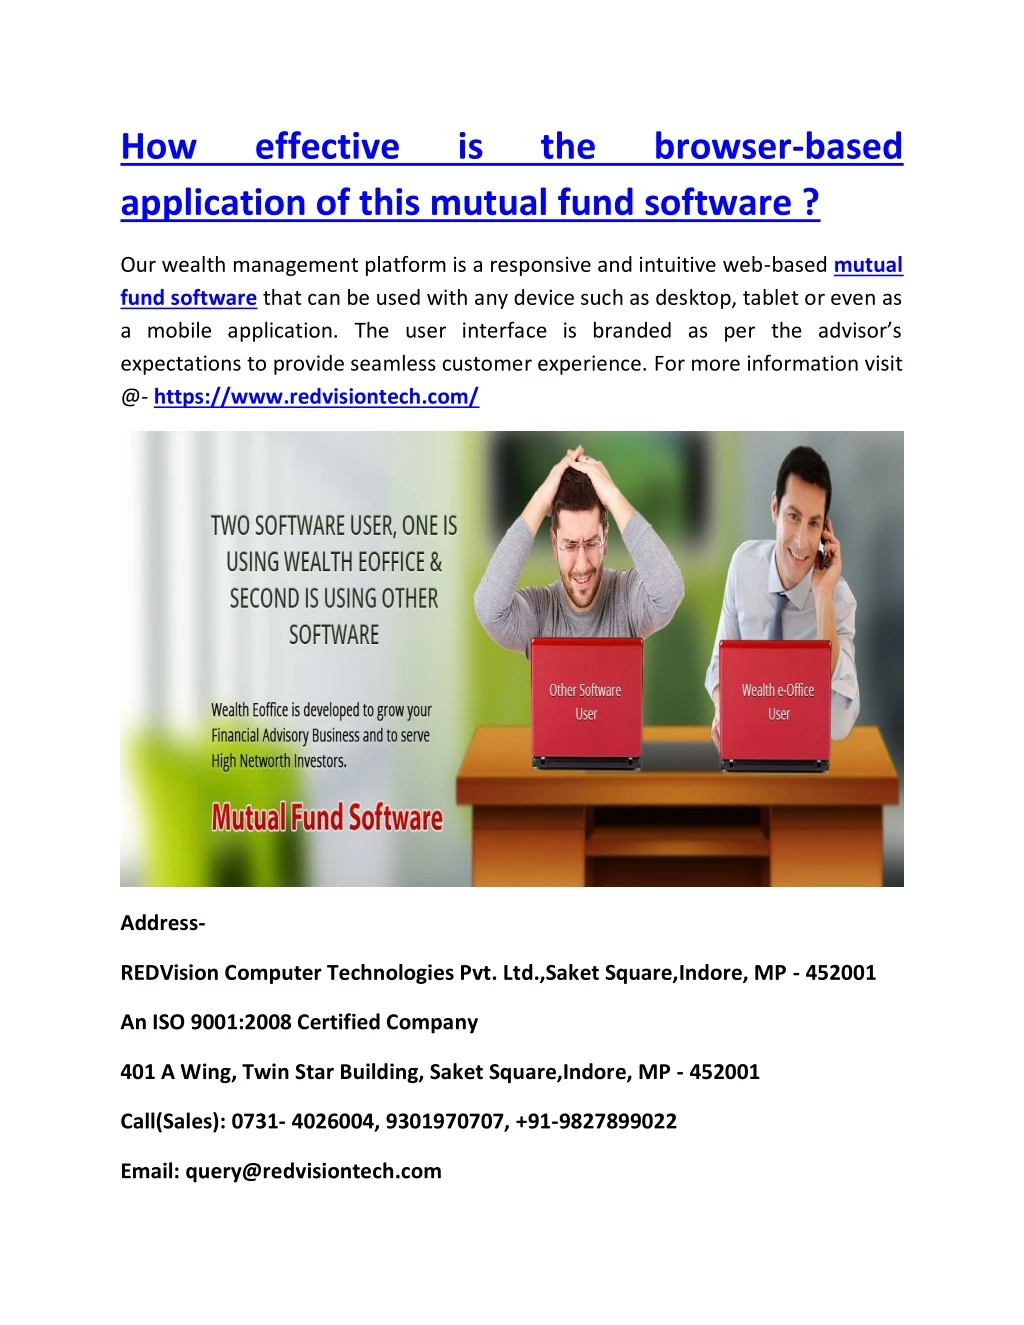 how application of this mutual fund software